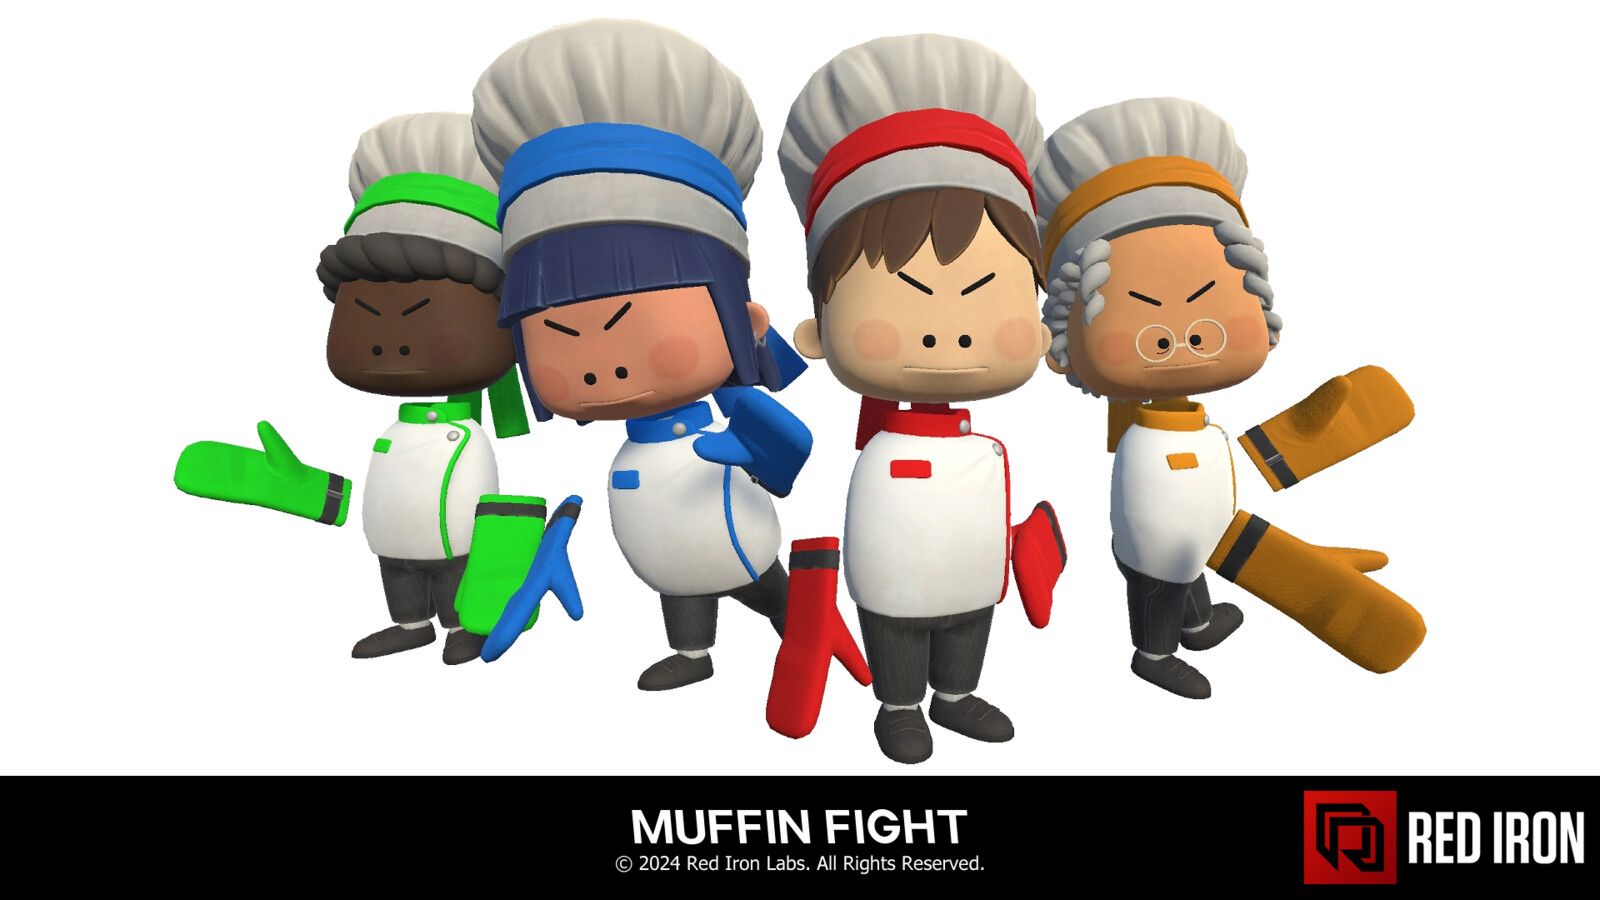 For the sake of time and budget, we decided to put the customization feature on hold and opted to create 4 unique chefs that would be randomly assigned to players when they join the game!